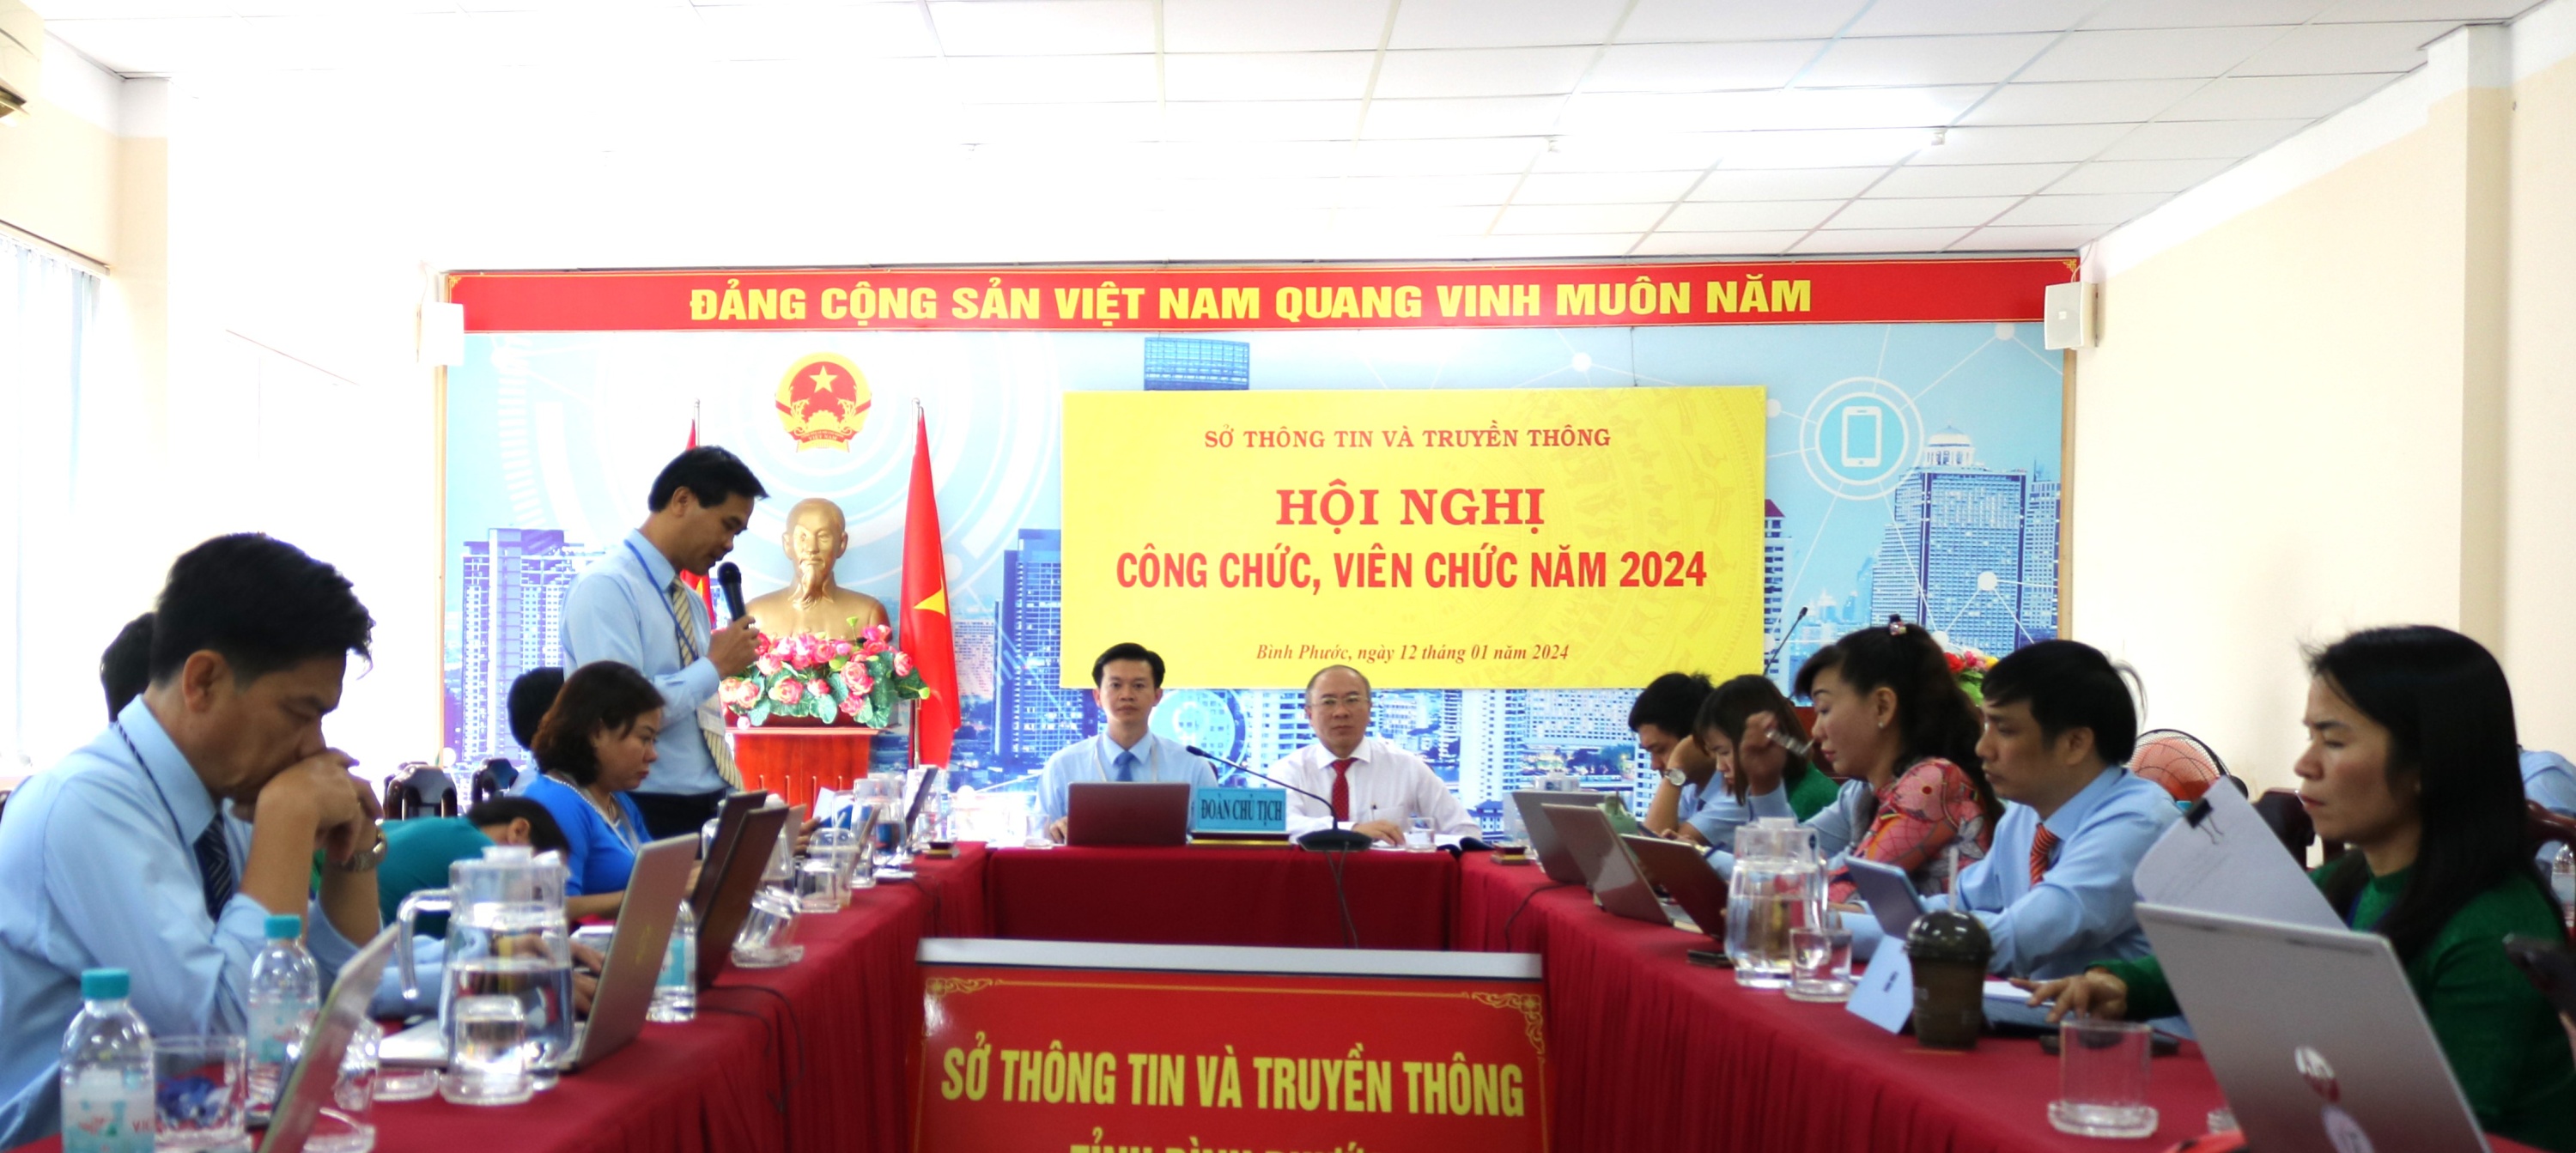 toan canh cong chức